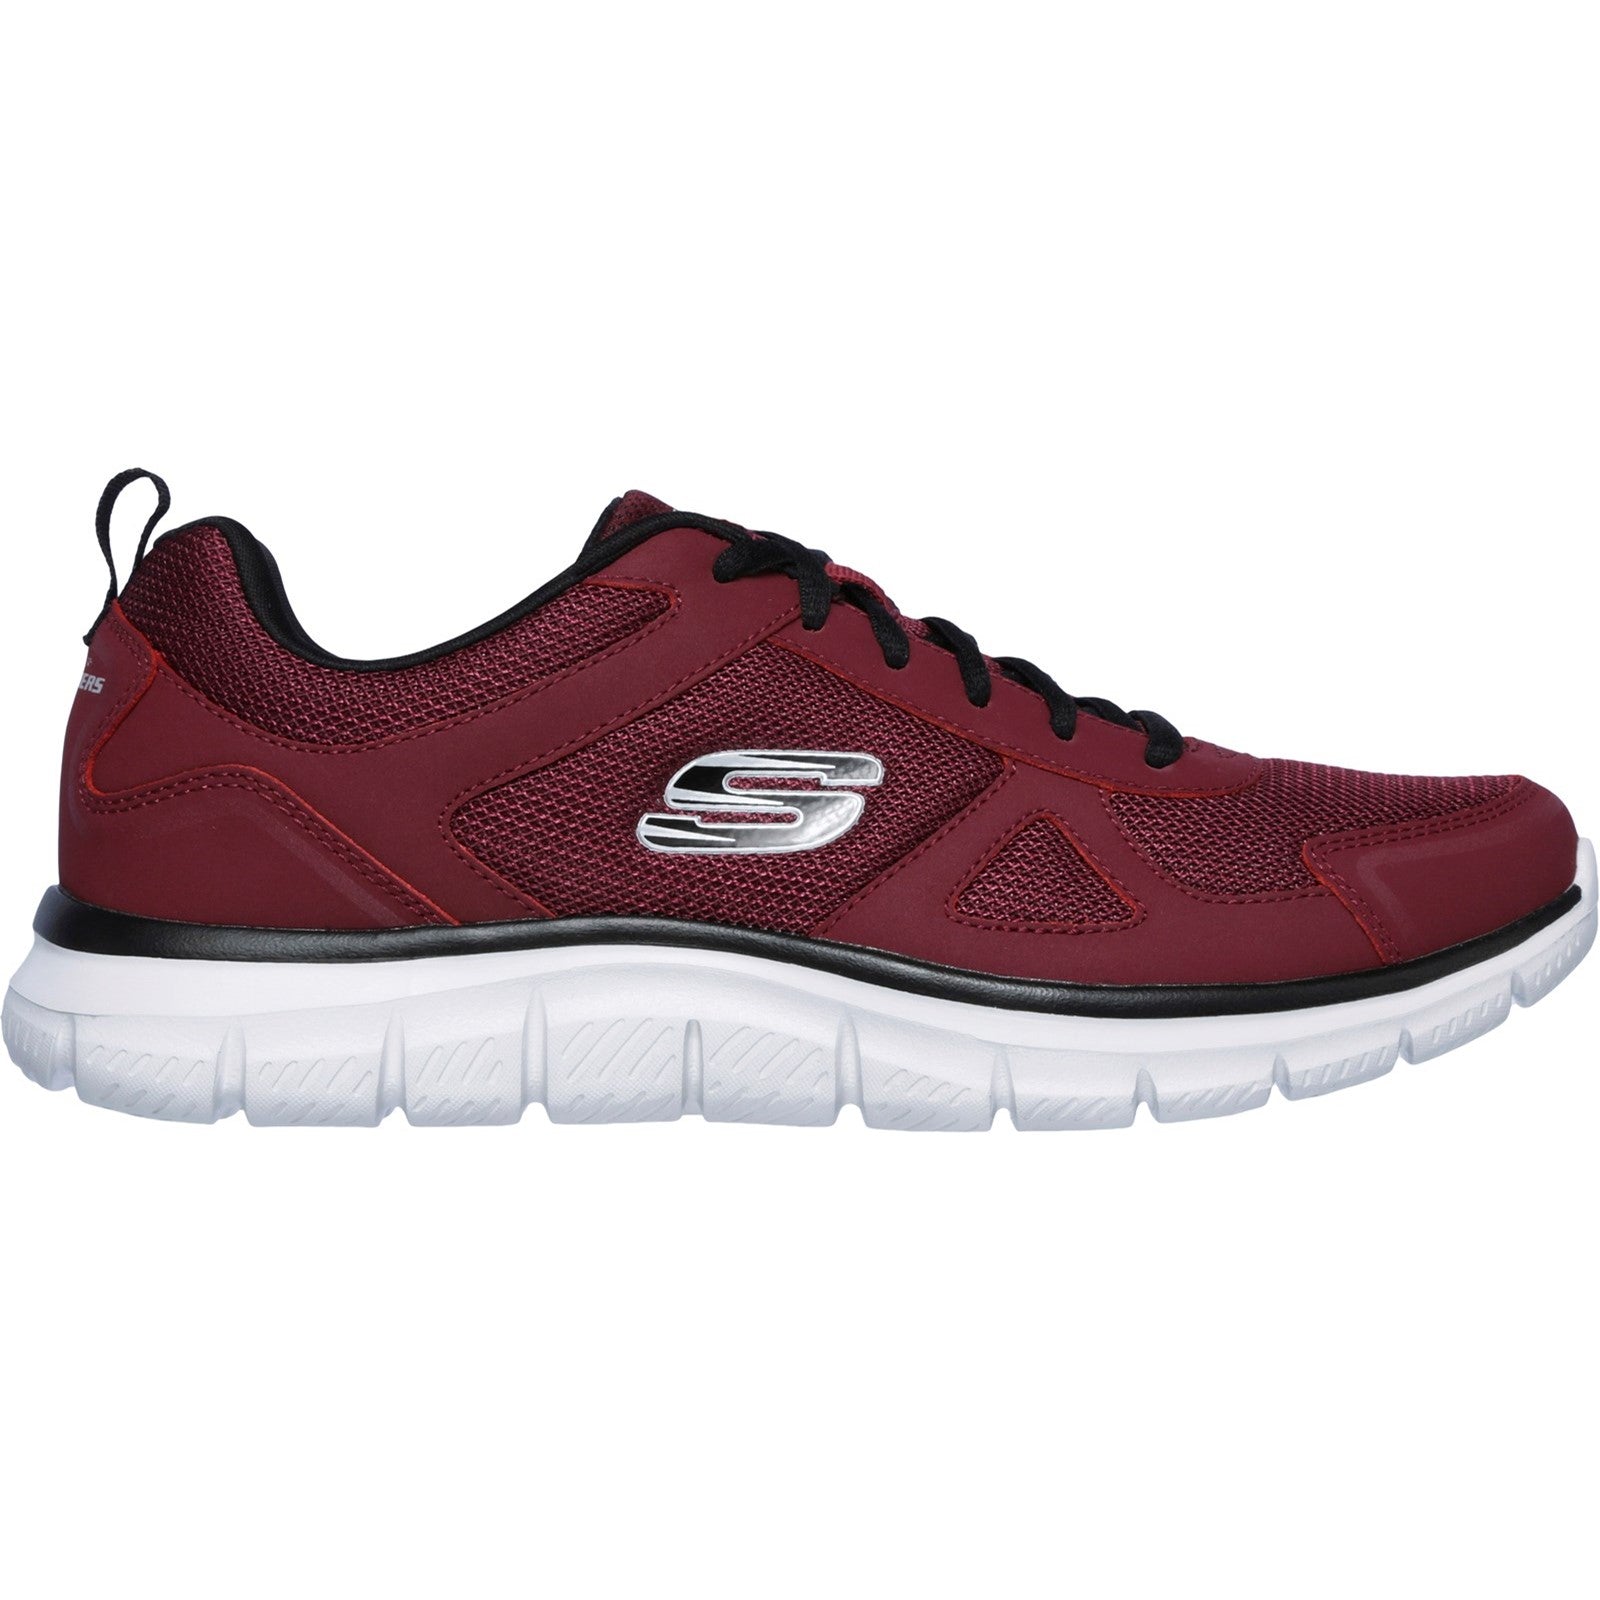 Skechers Mens Track Scloric Trainers - Red